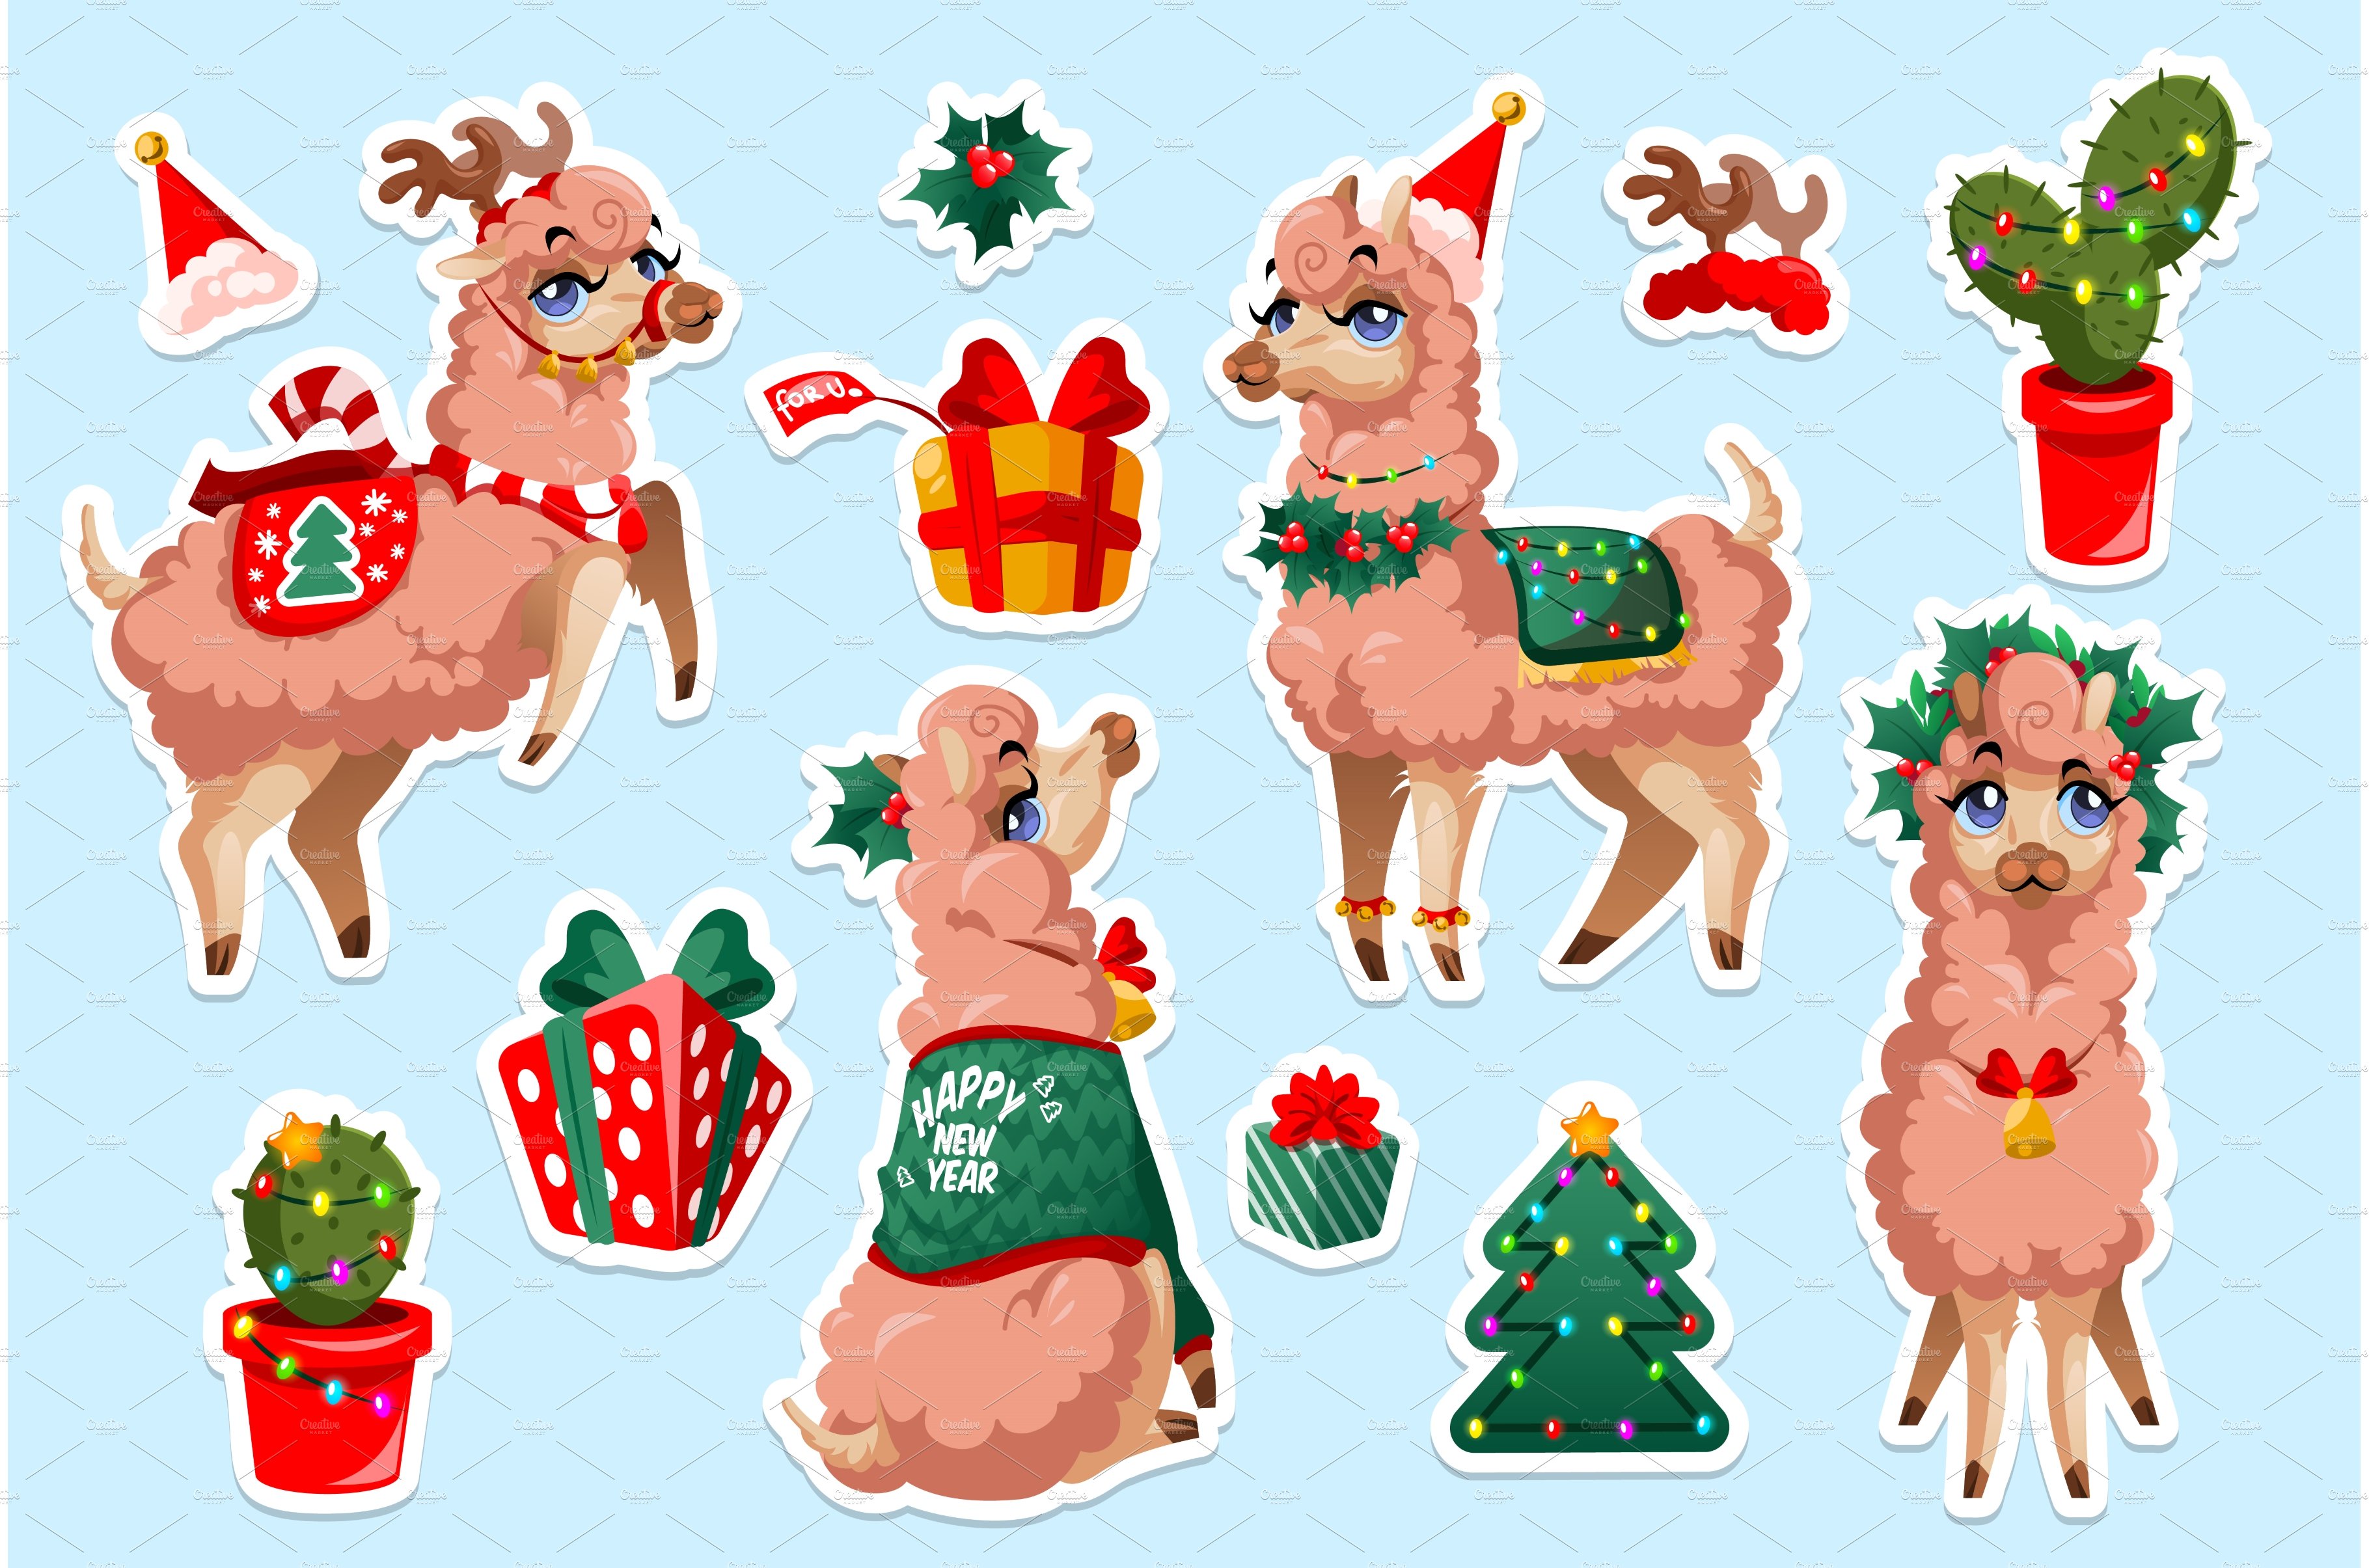 Set of stickers with New Year Llama cover image.